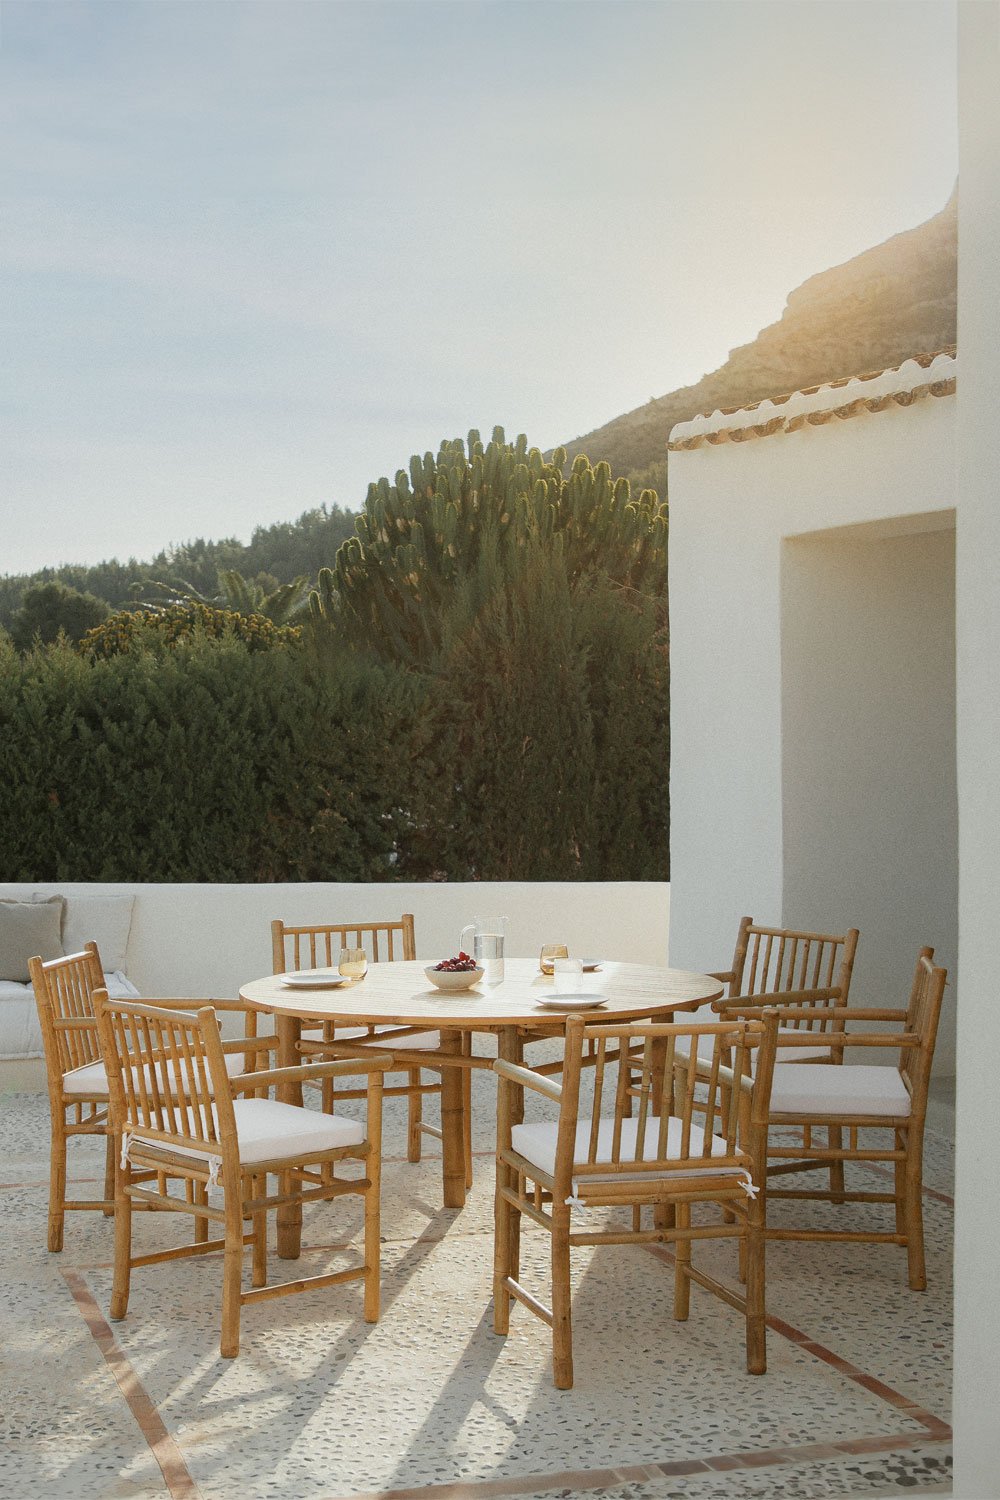 Set of Round Table (Ø140 cm) and 6 Garden Chairs with Armrests in Senia Bamboo, gallery image 1